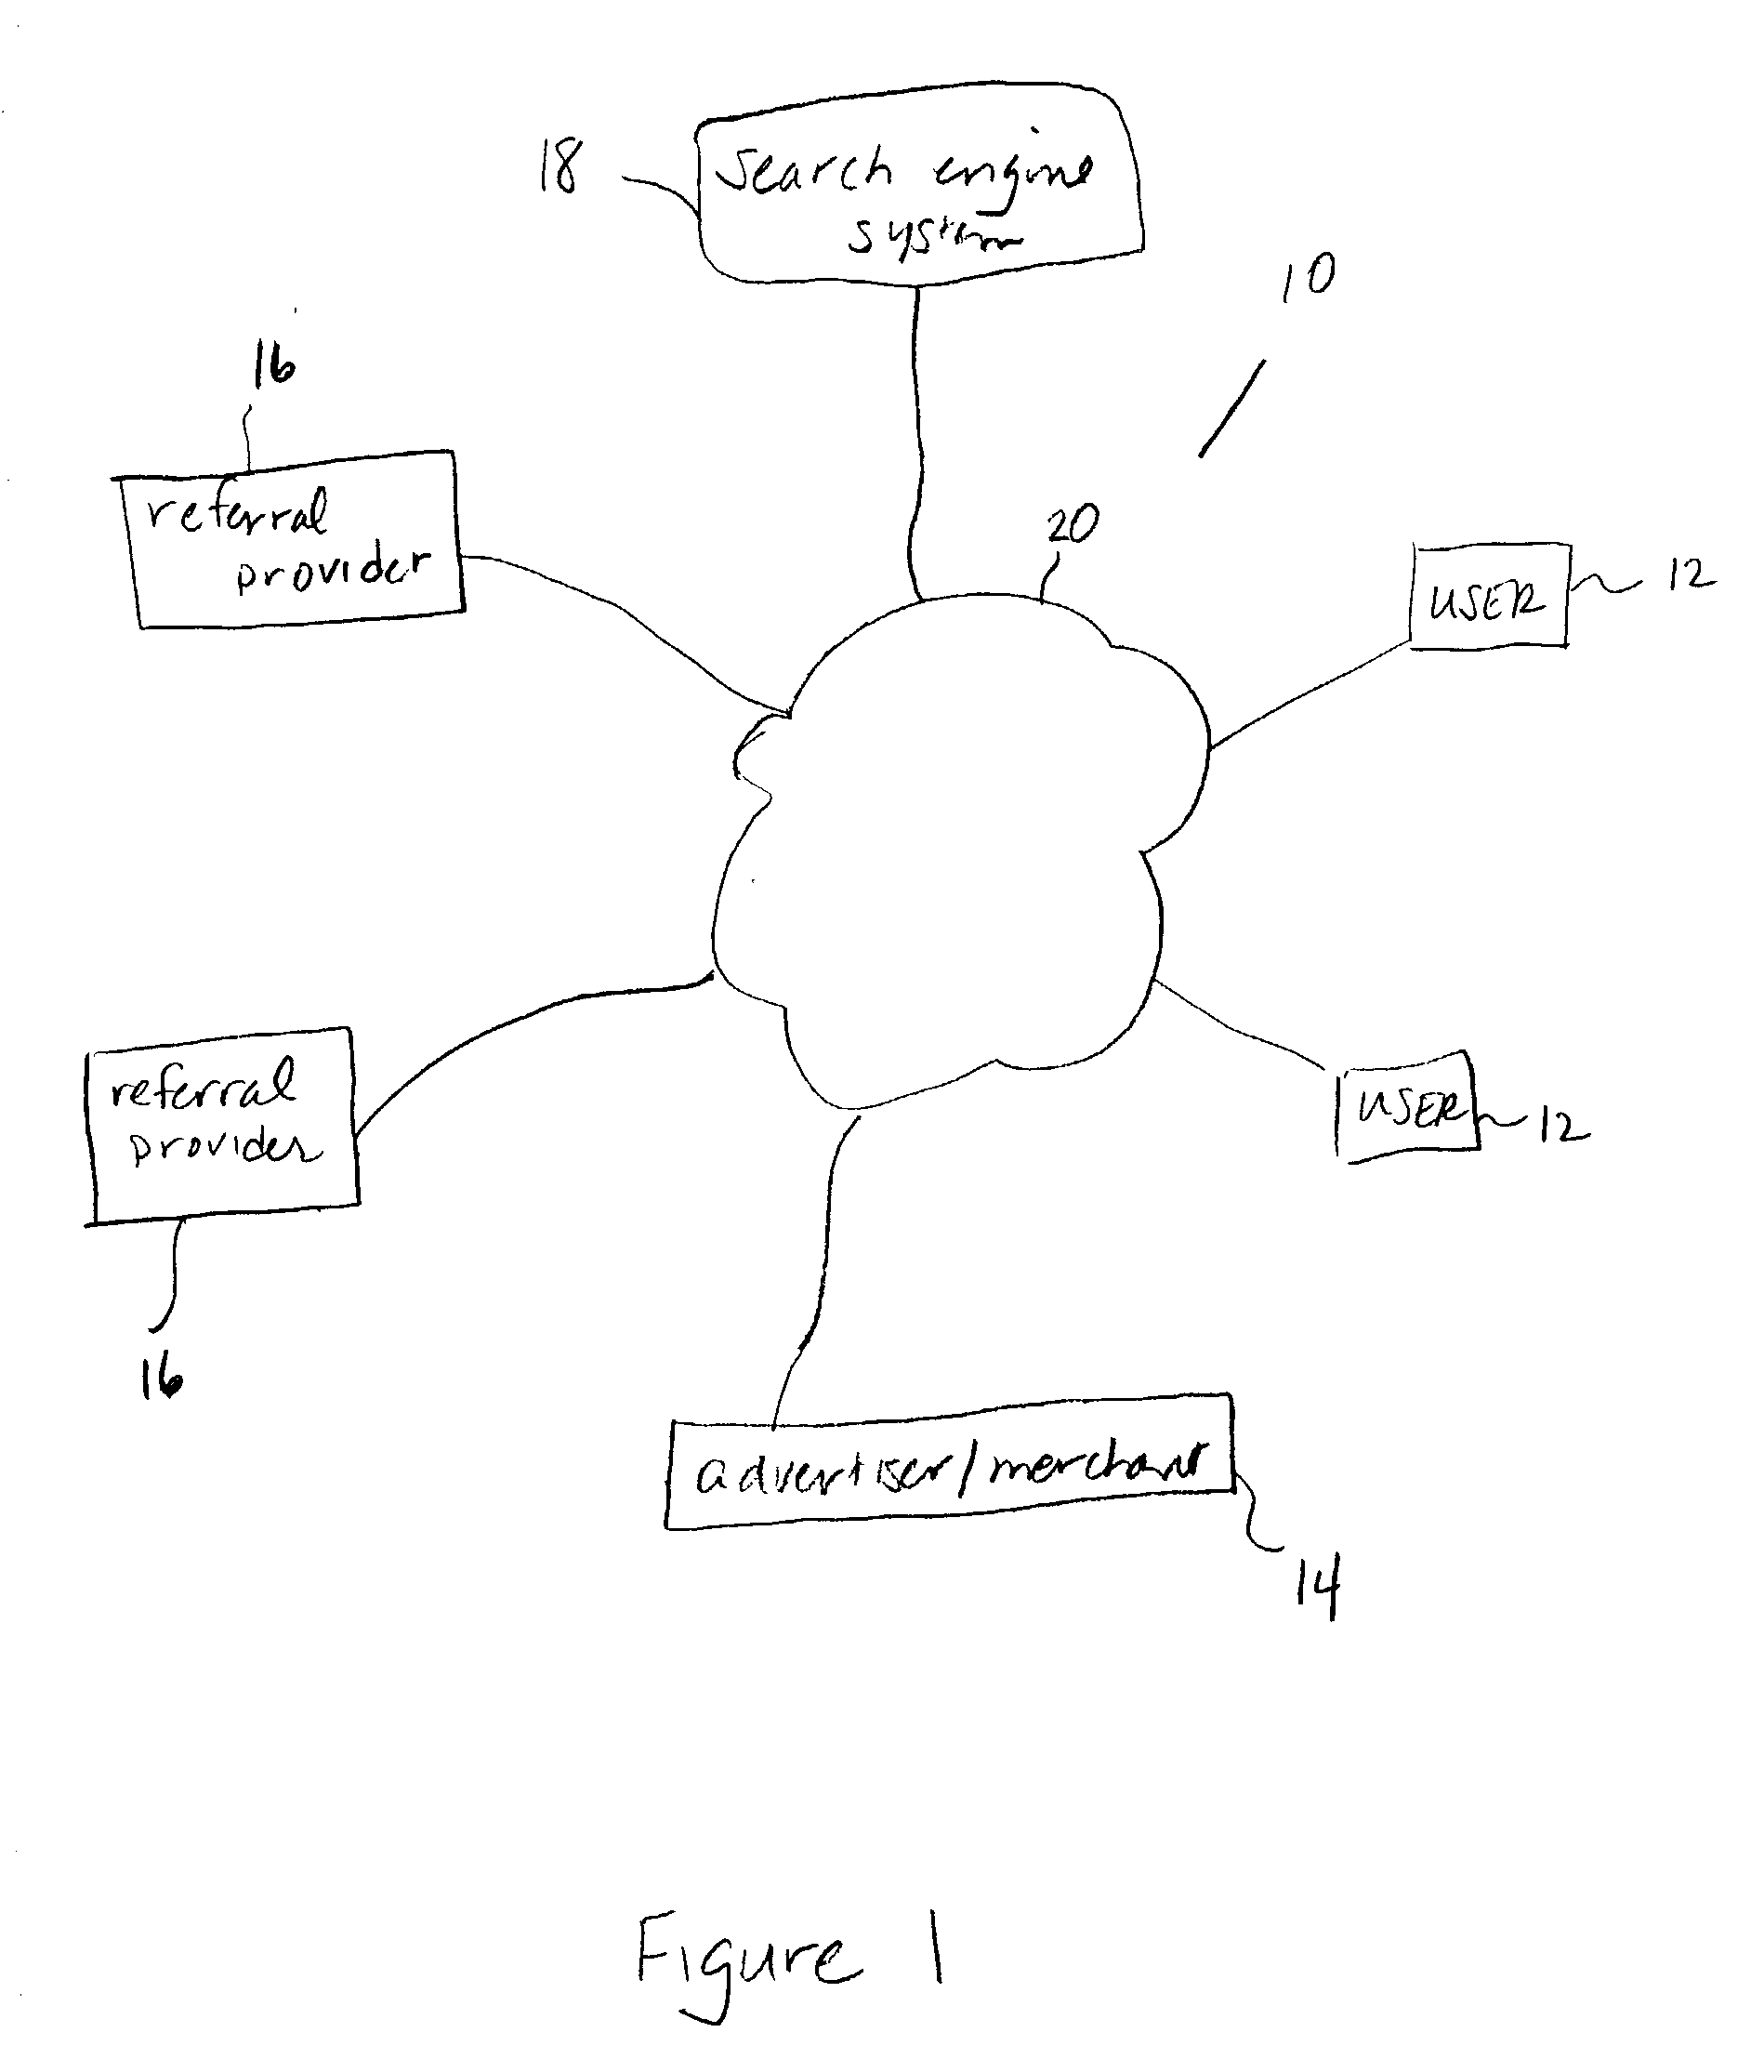 Cost-per-action search engine system, method and apparatus